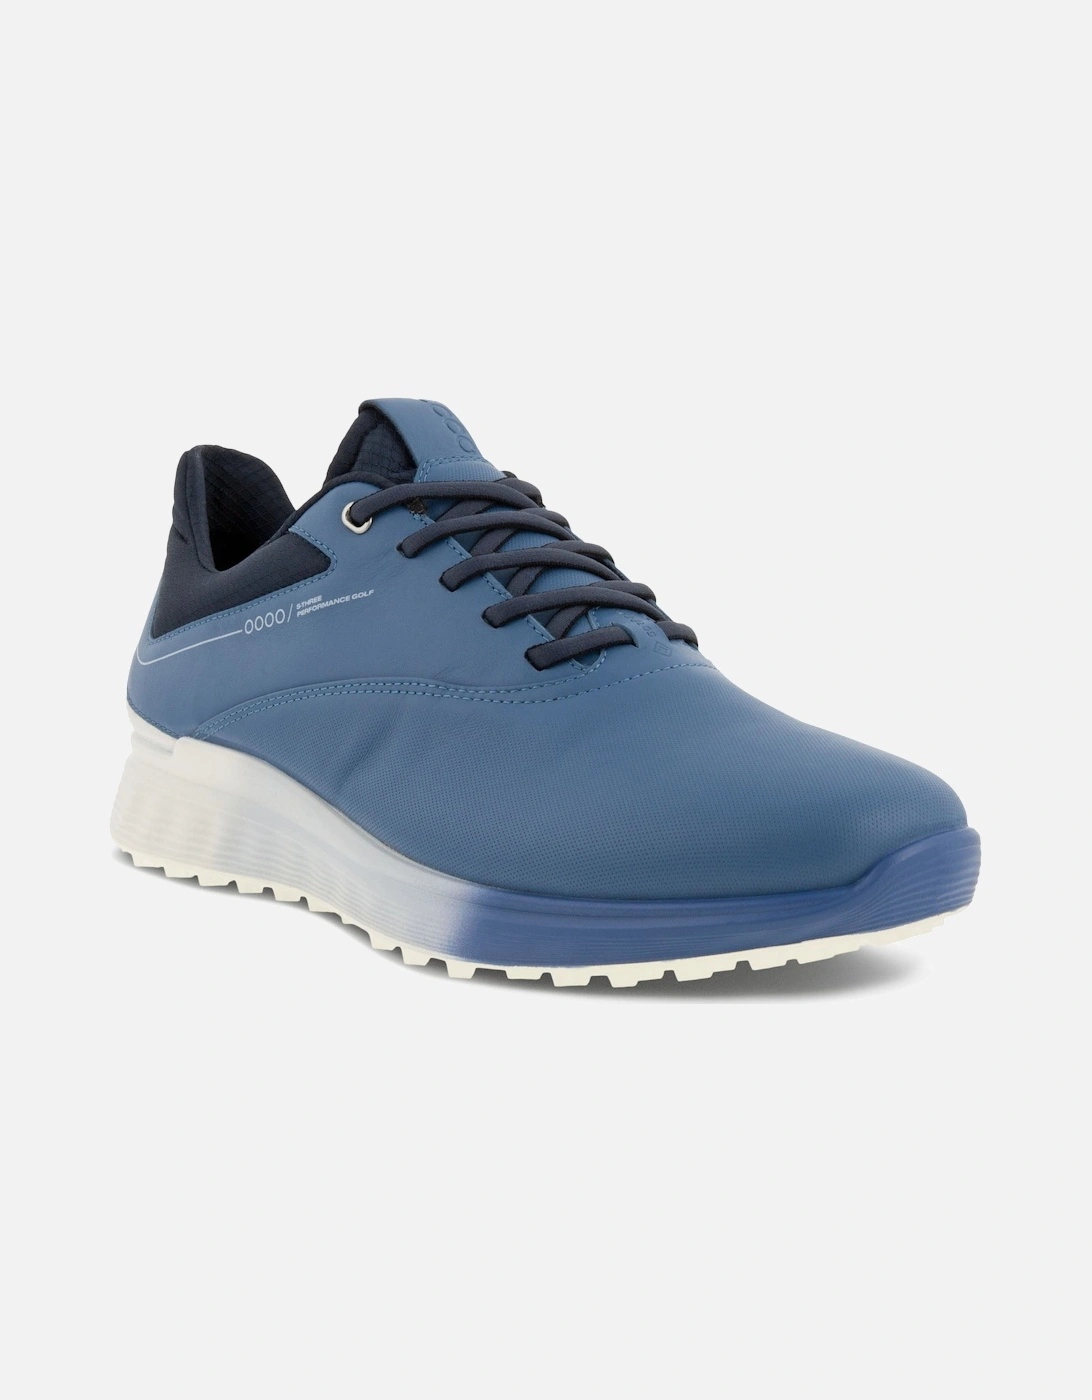 Mens S-Three Leather GORE-TEX Golf Shoes